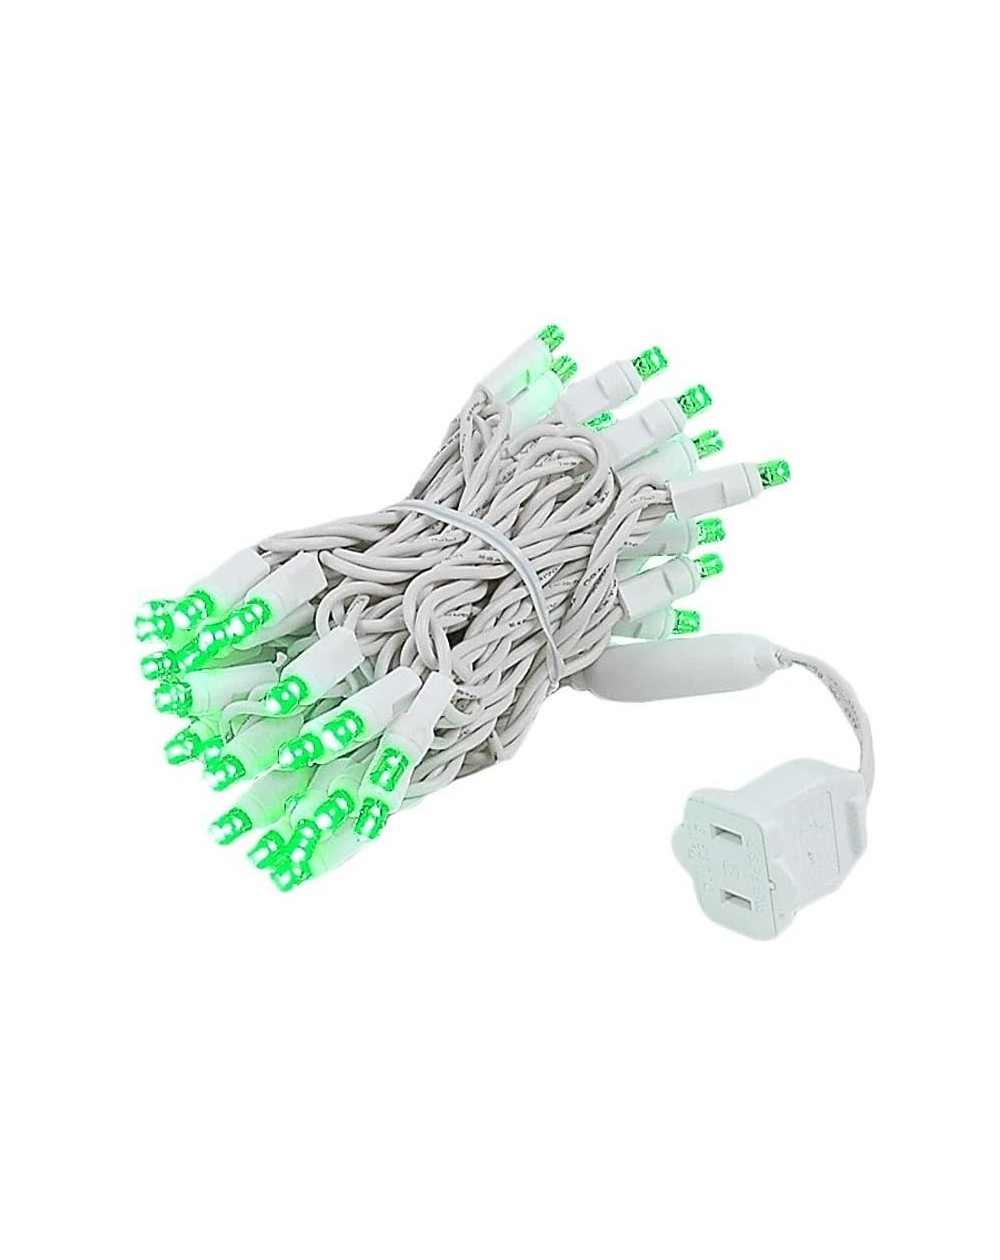 Outdoor String Lights 50 Light LED Christmas Mini Light Set- Outdoor Lighting Wedding Patio String Lights- Green- White Wire-...